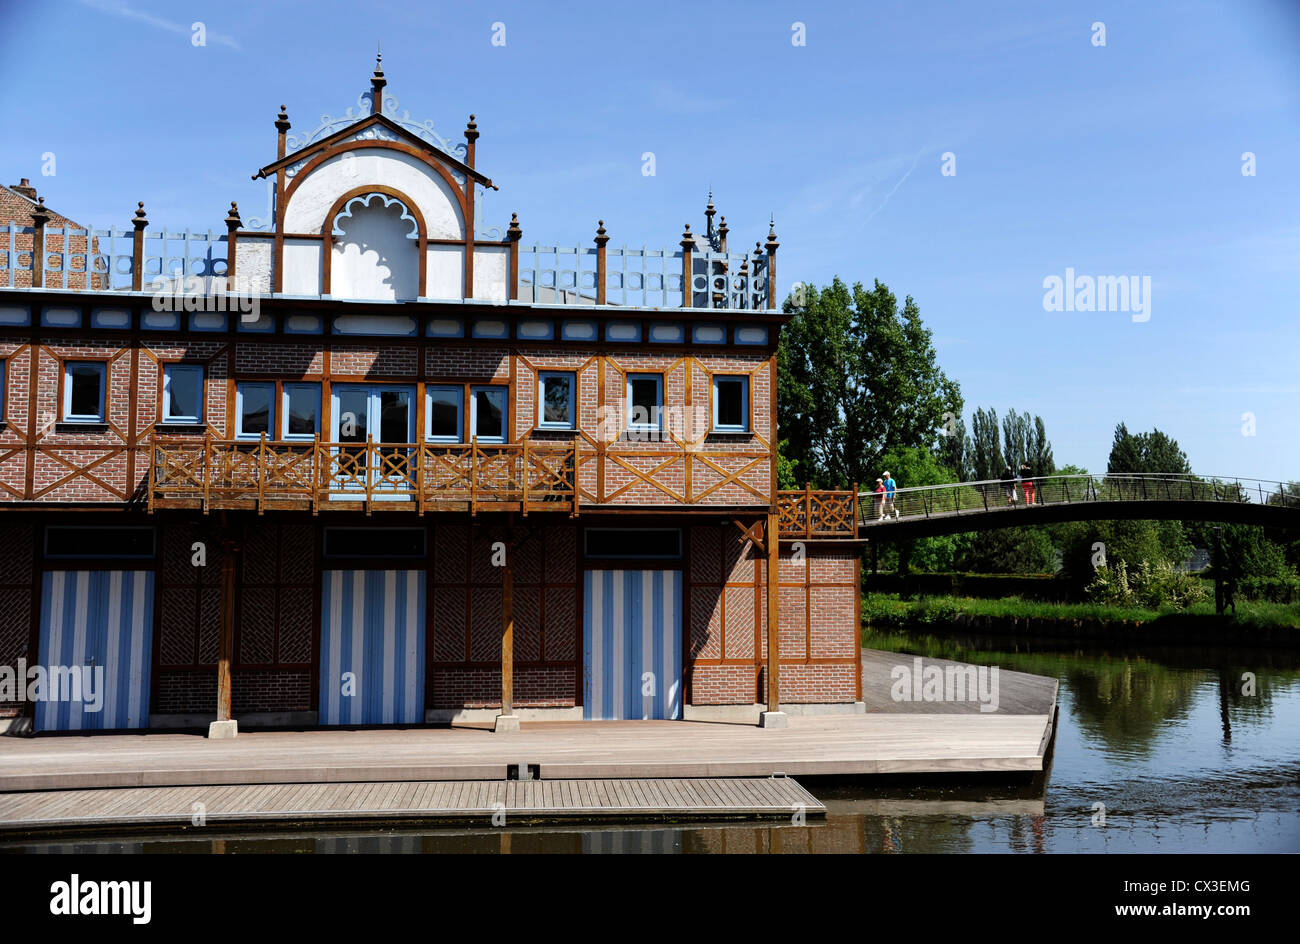 Sport Nautique Amiens, Clubhaus, Somme River, Amiens, Somme, Picardie, Frankreich Stockfoto